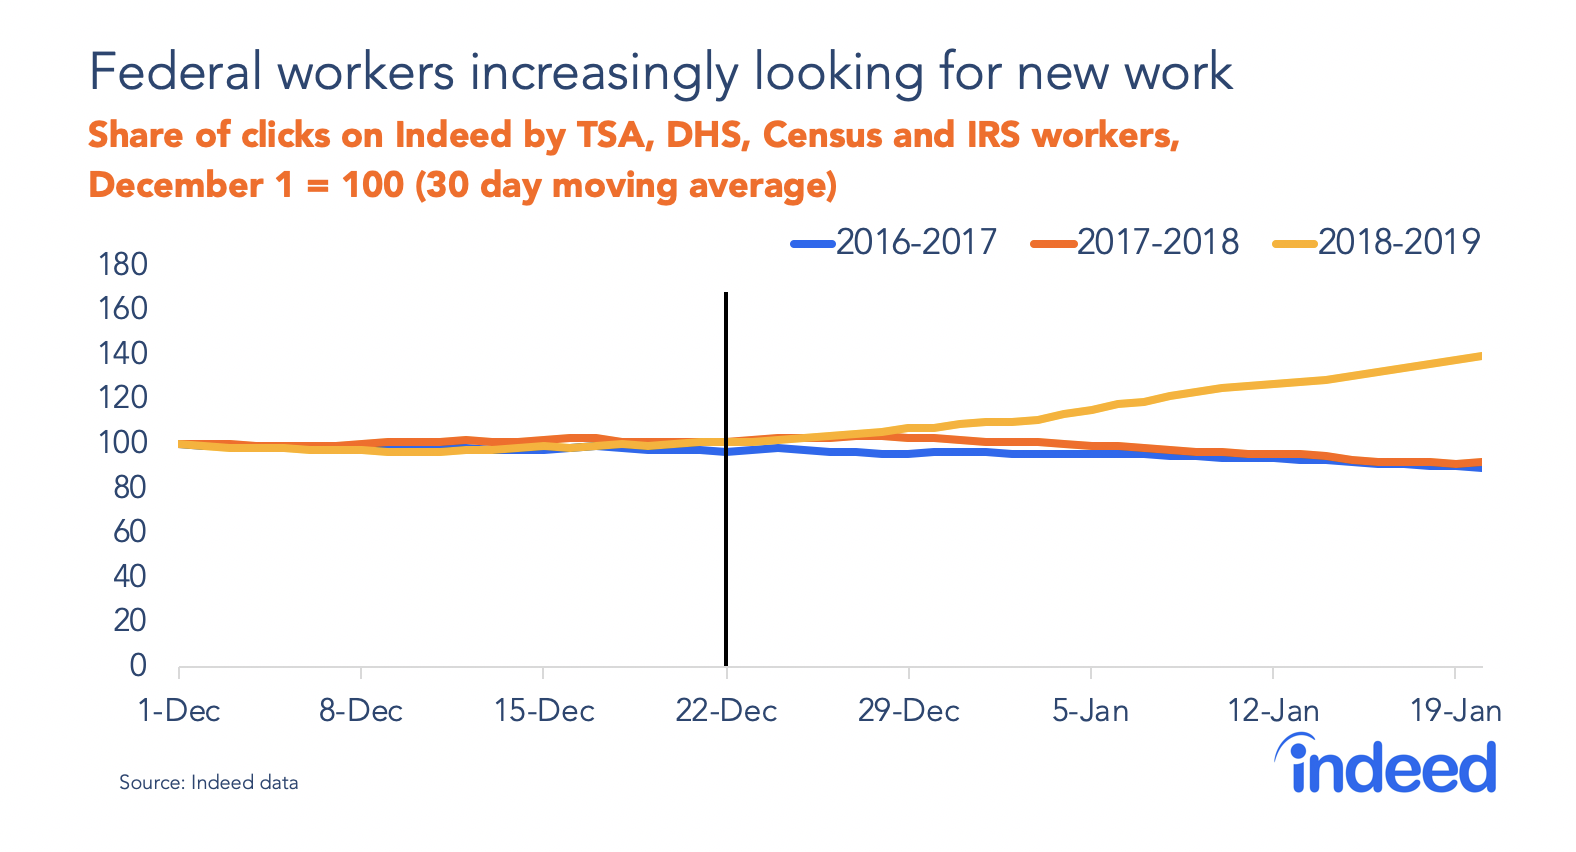 Federal workers increasingly looking for new work